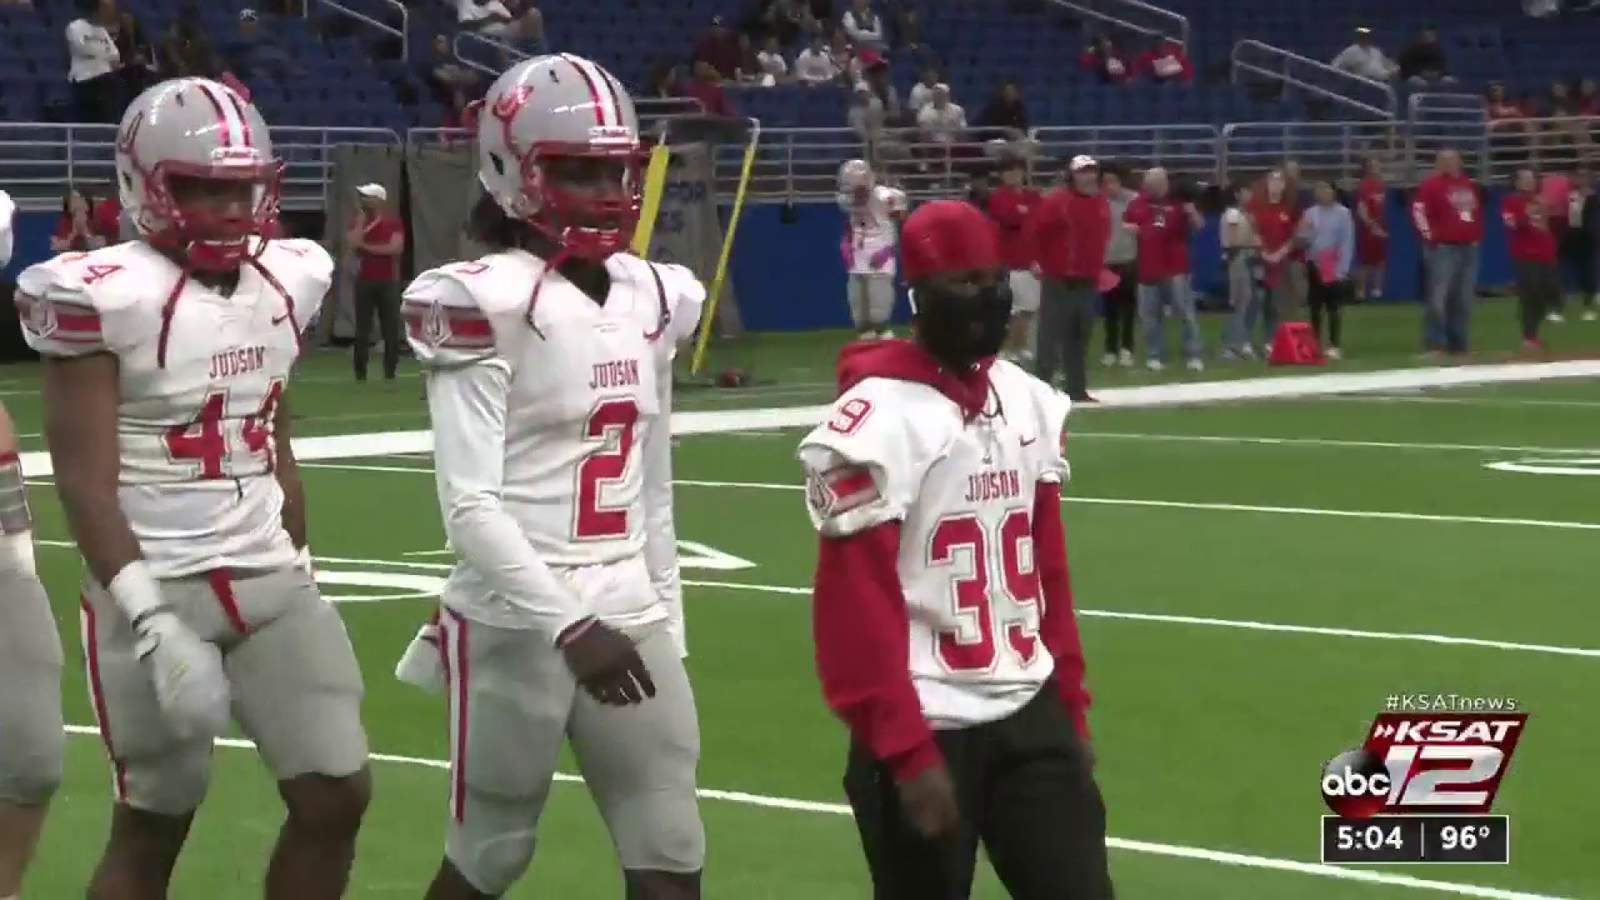 Judson’s Bryce Wisdom passes away after battle with cancer